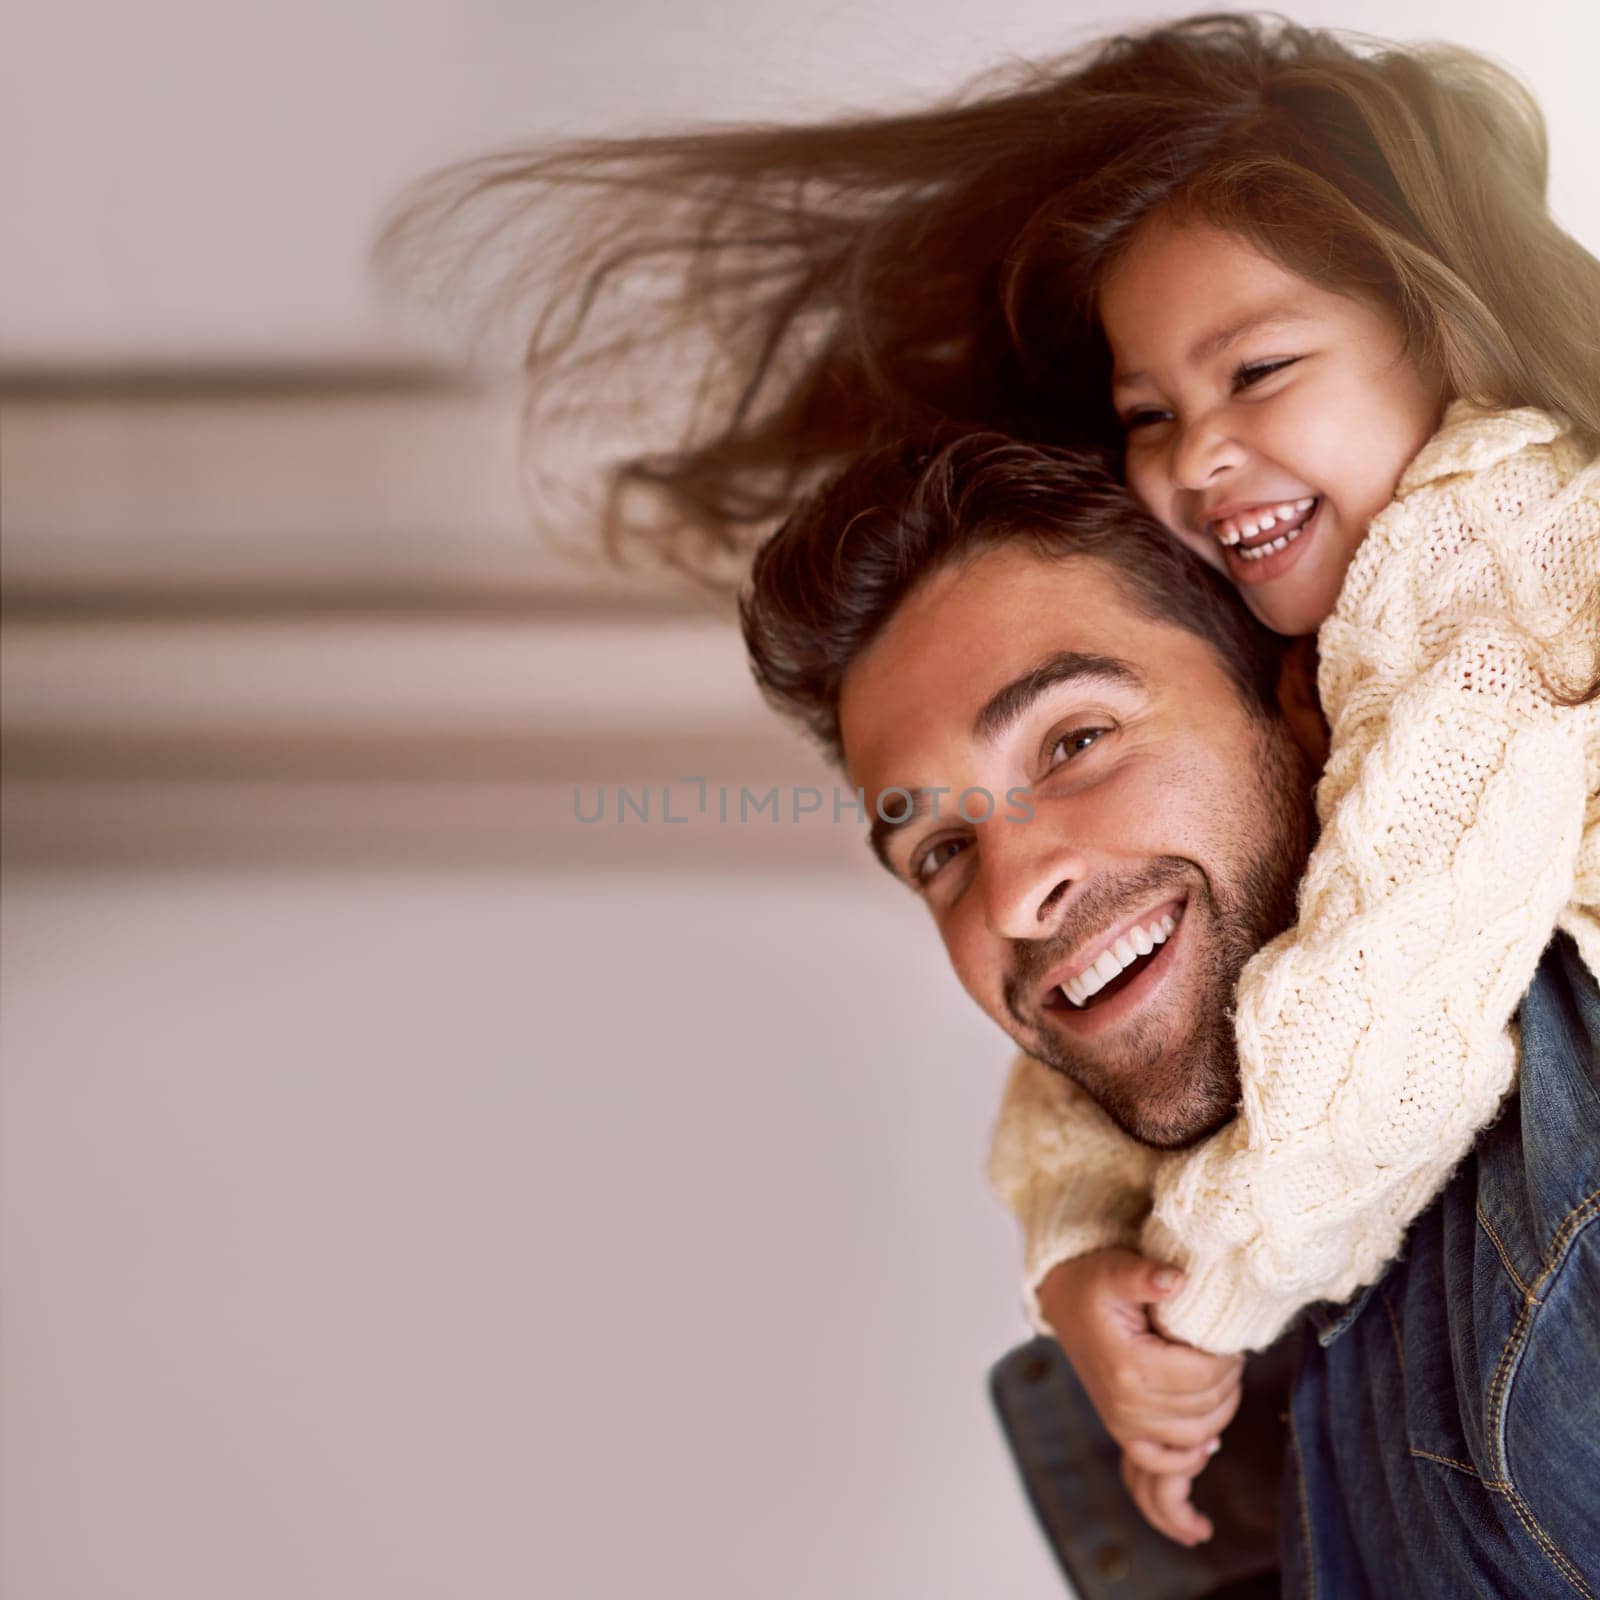 Happy, piggyback and hug from child for dad in home on holiday or relax with family on vacation. Father, love and support girl on back for crazy funny game, bonding and playing together on weekend.